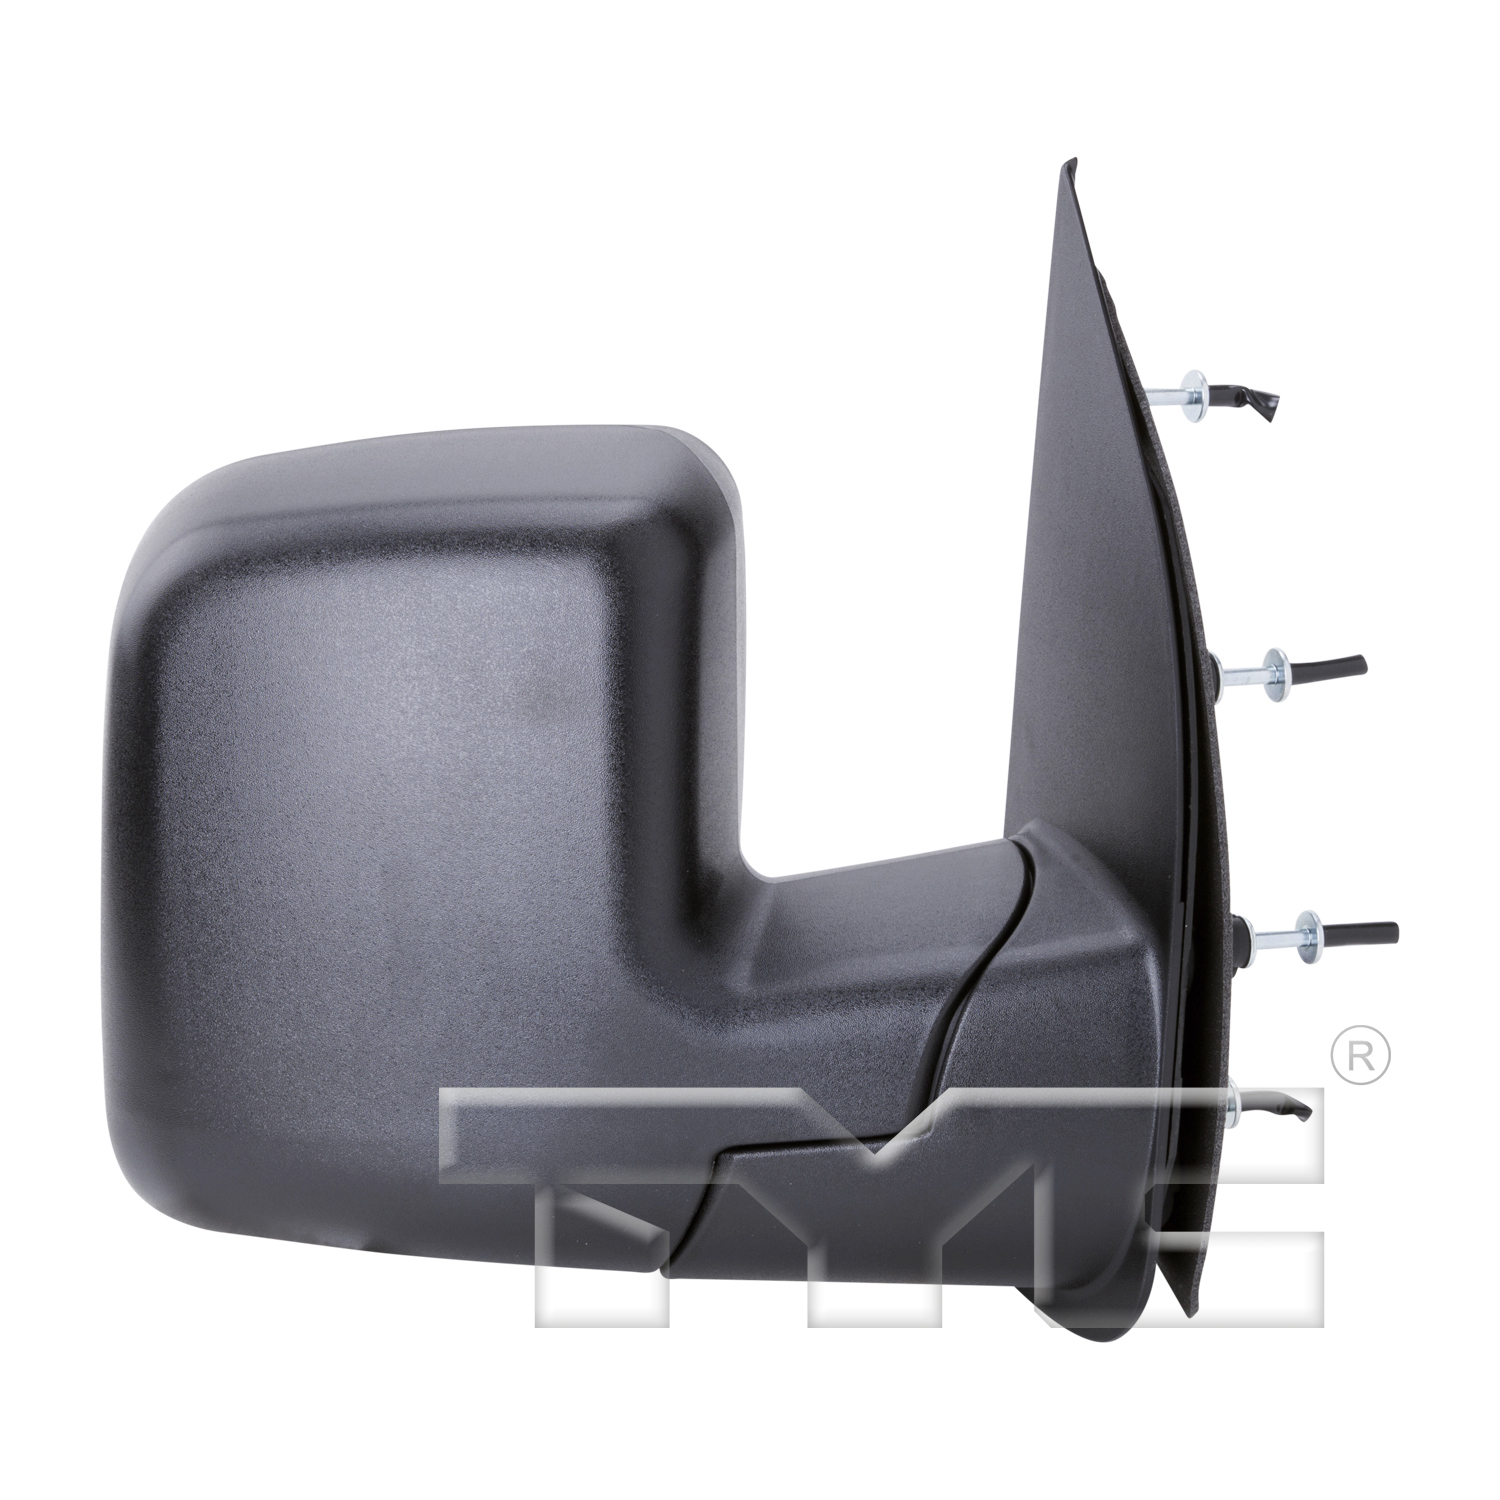 Aftermarket MIRRORS for FORD - E-350 SUPER DUTY, E-350 SUPER DUTY,02-07,RT Mirror outside rear view